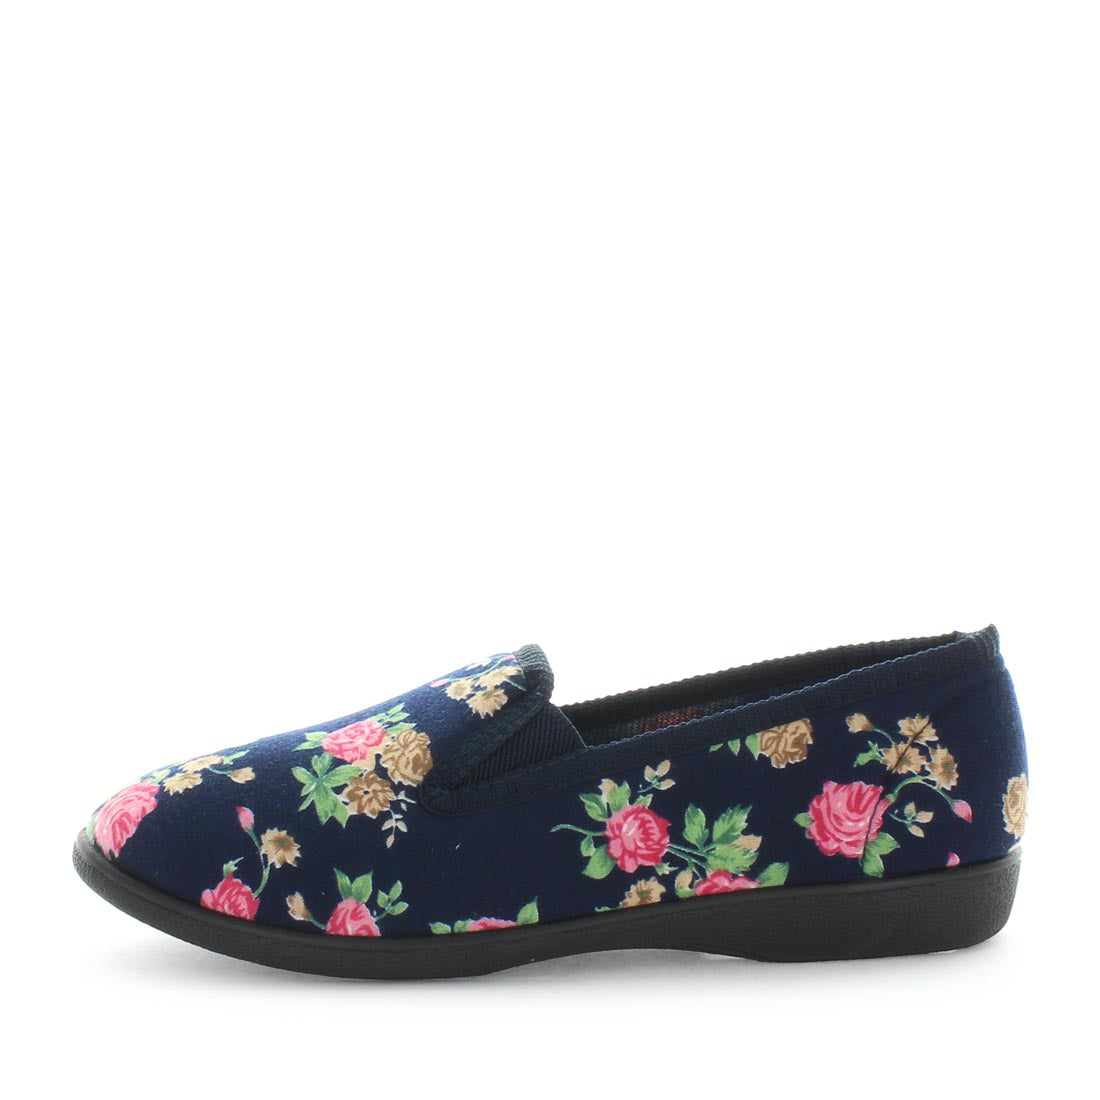 womens slippers - Navy Floral Erta slipper, by panda Slippers. A slip on style slipper with embossed velour twin gussets and a quilted satin lining and sock for a soft to the touch feel.